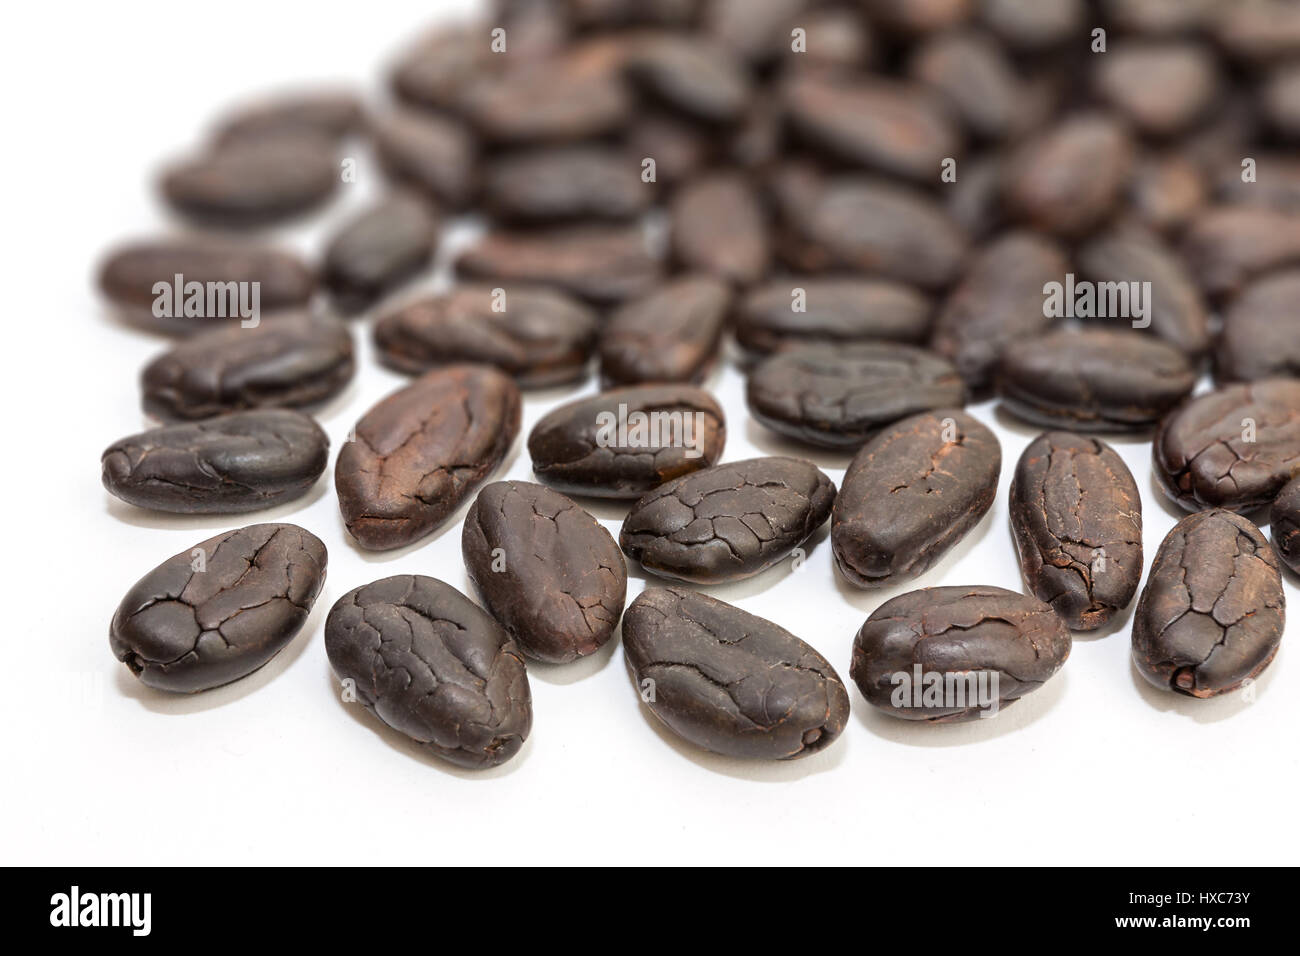 Cocoa beans from Madagascar Stock Photo